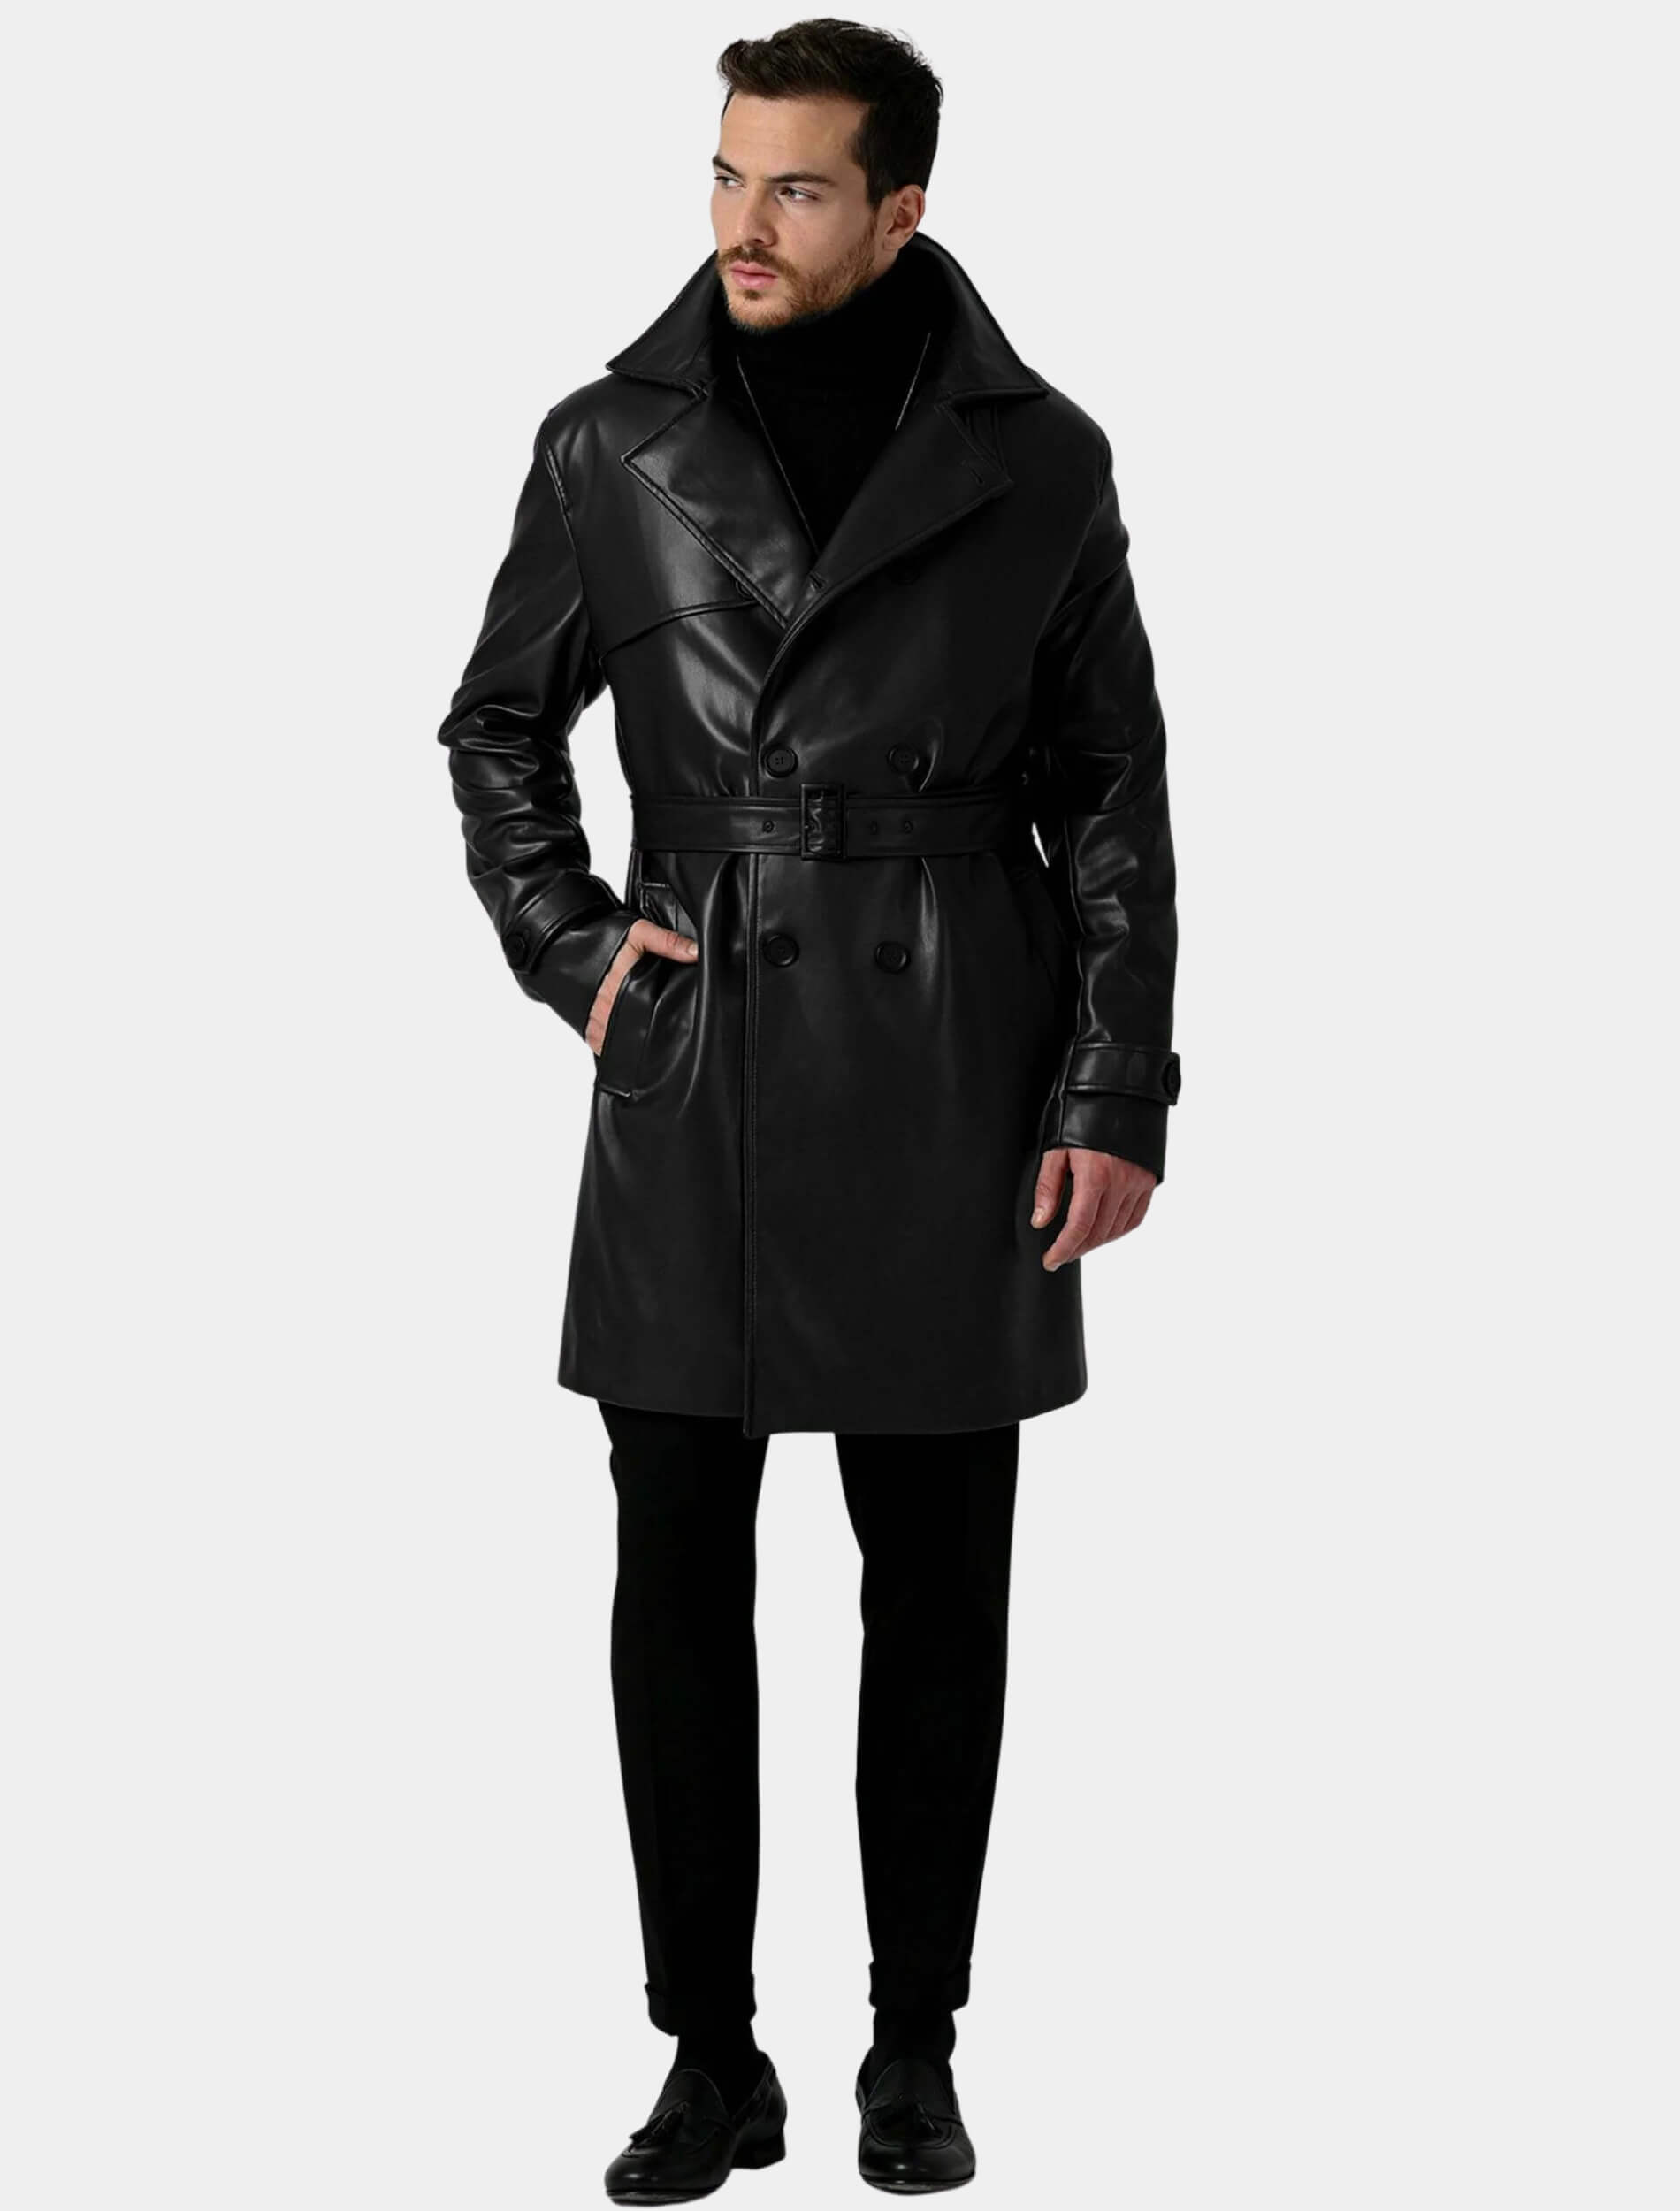 Mens Classic Black Leather Trench Coat Mens Leather Wear